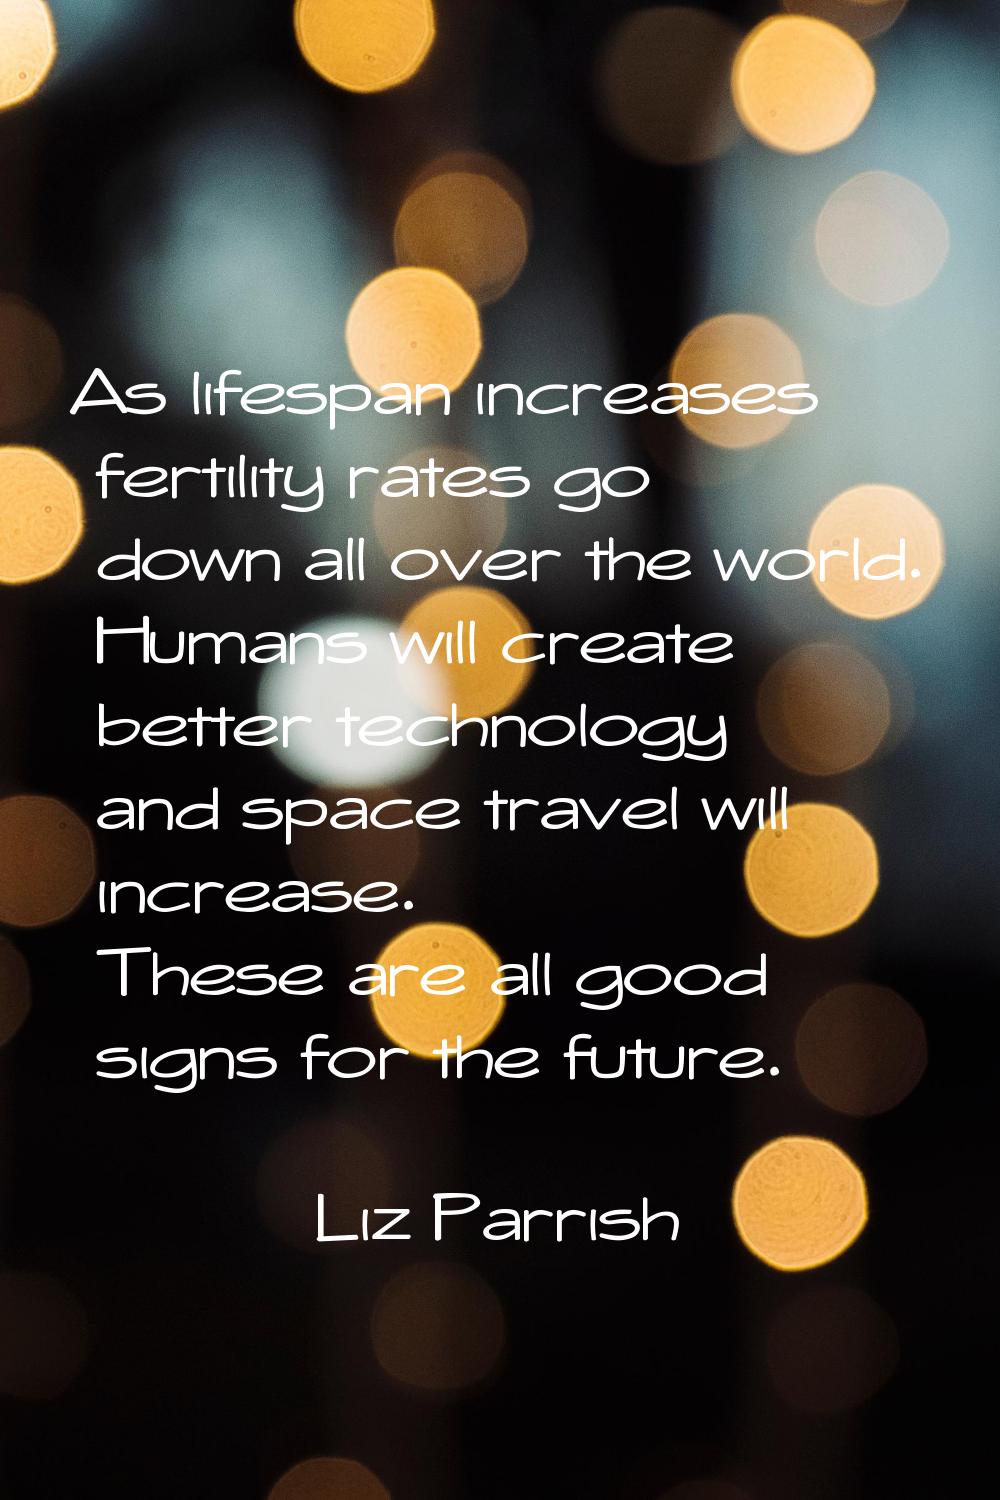 As lifespan increases fertility rates go down all over the world. Humans will create better technol